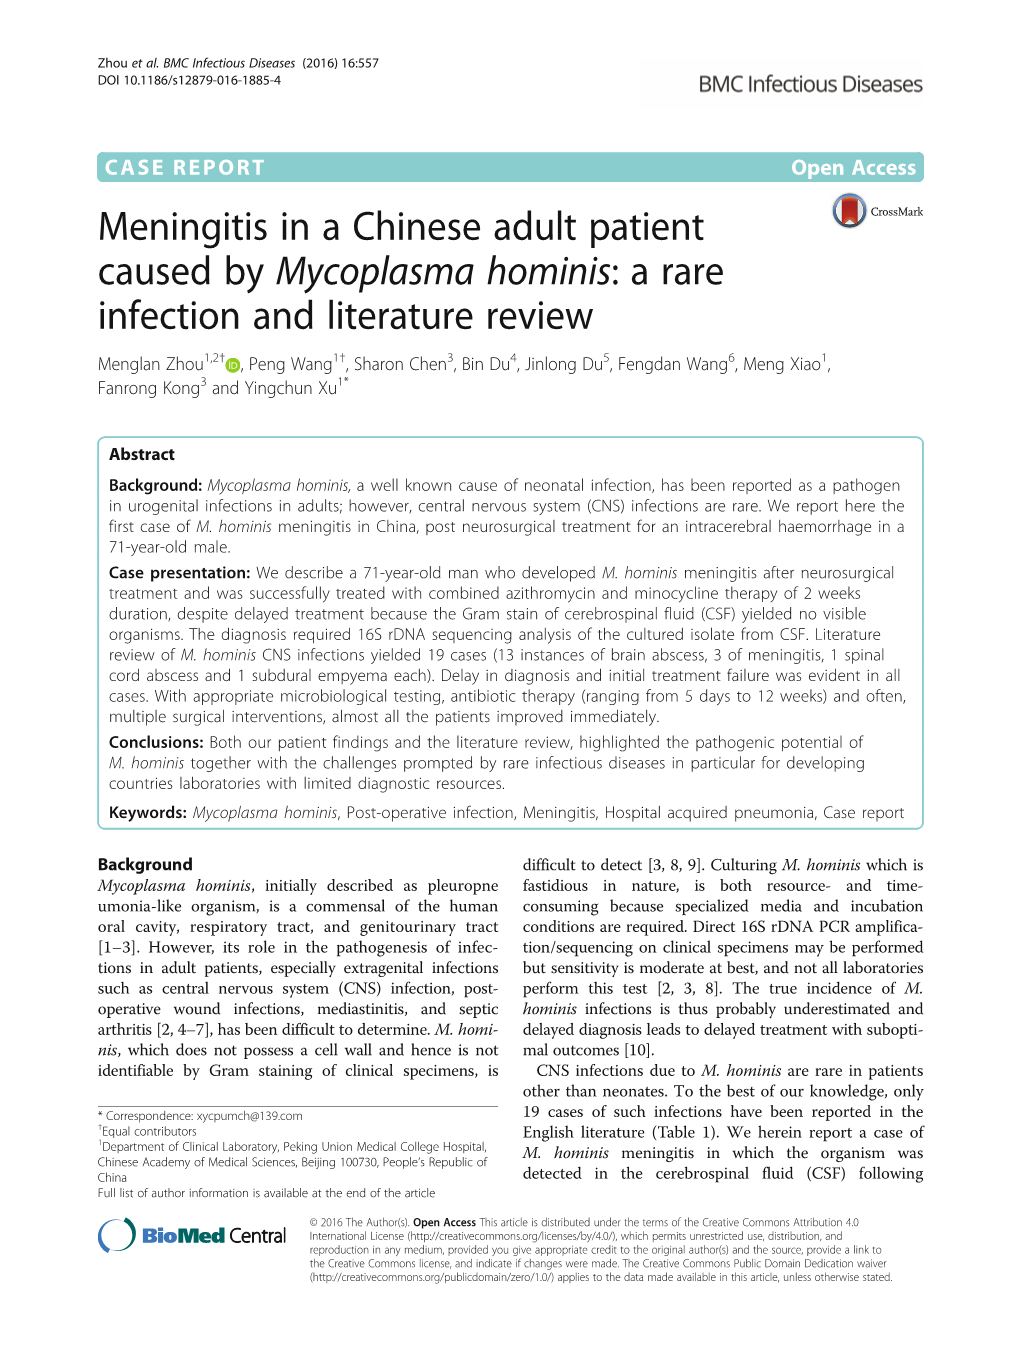 Meningitis in a Chinese Adult Patient Caused by Mycoplasma Hominis: a Rare Infection and Literature Review